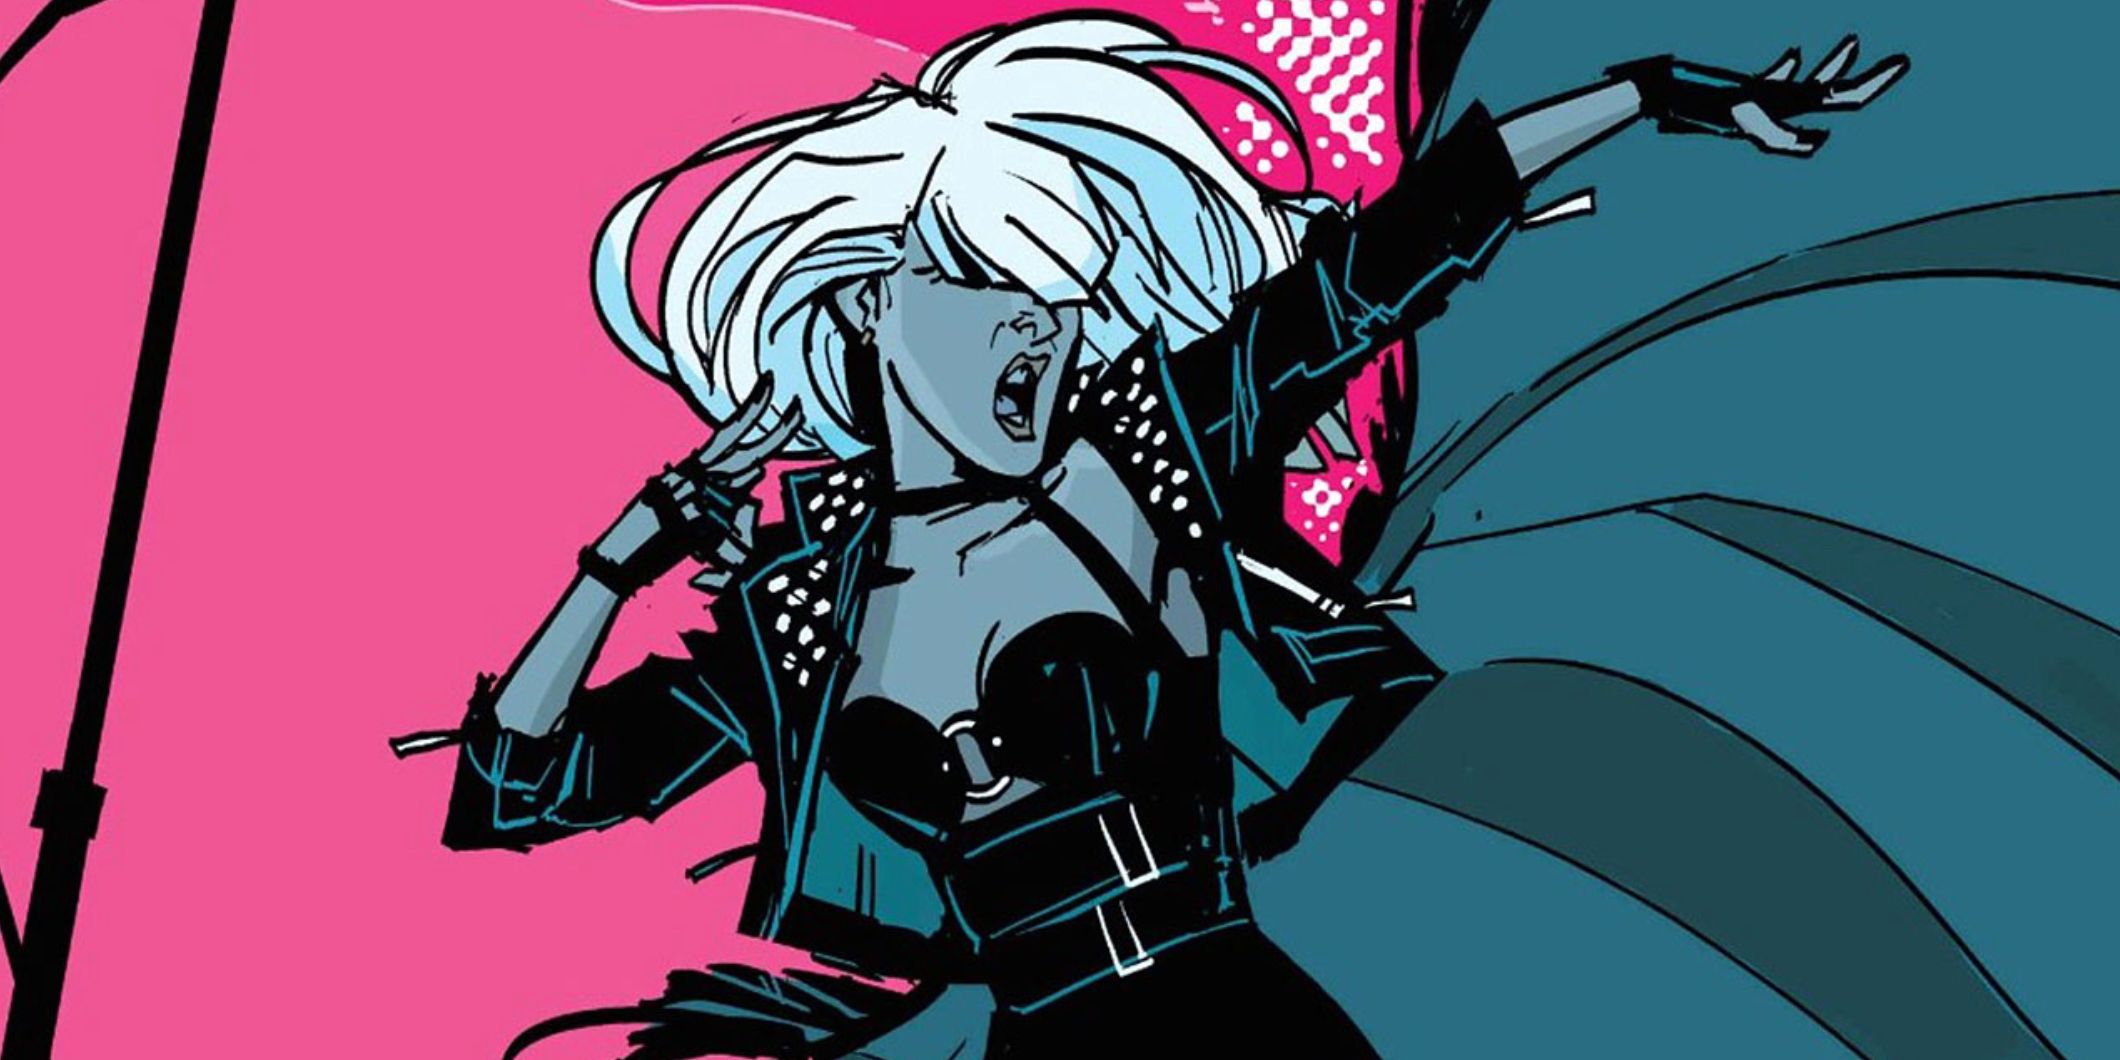 Black Canary as a musician in the 2016 comics